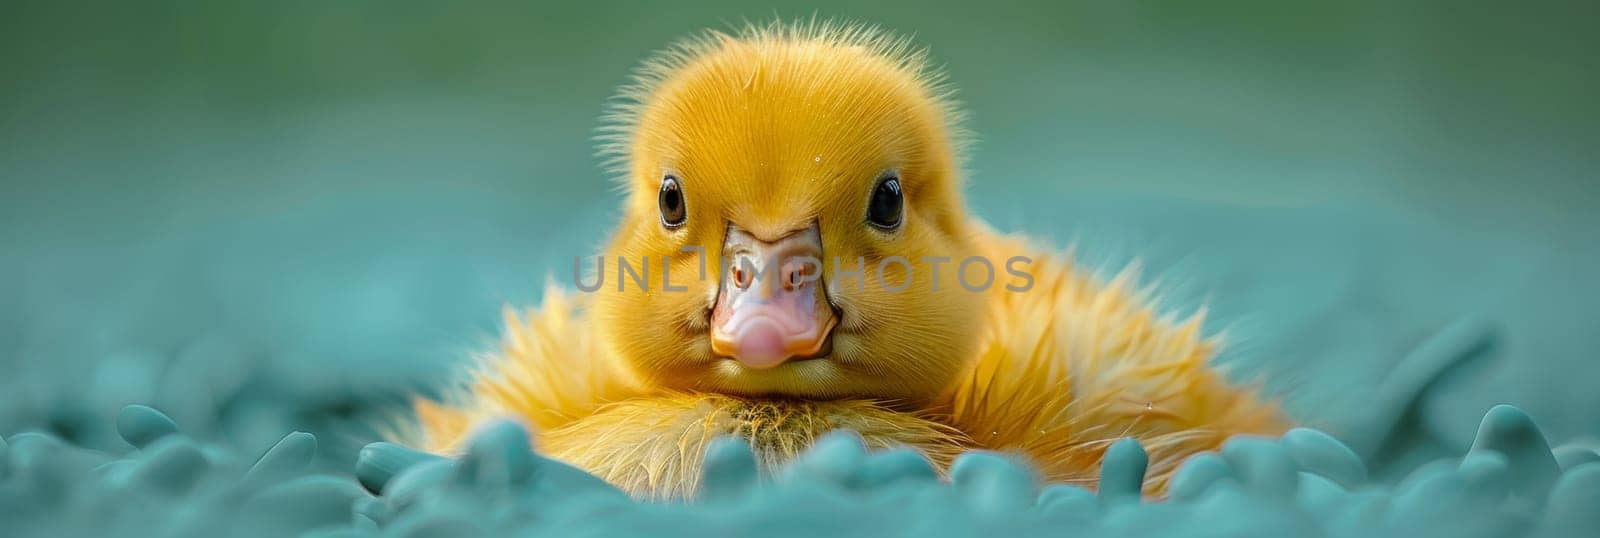 A close up of a duckling with its head sticking out, AI by starush